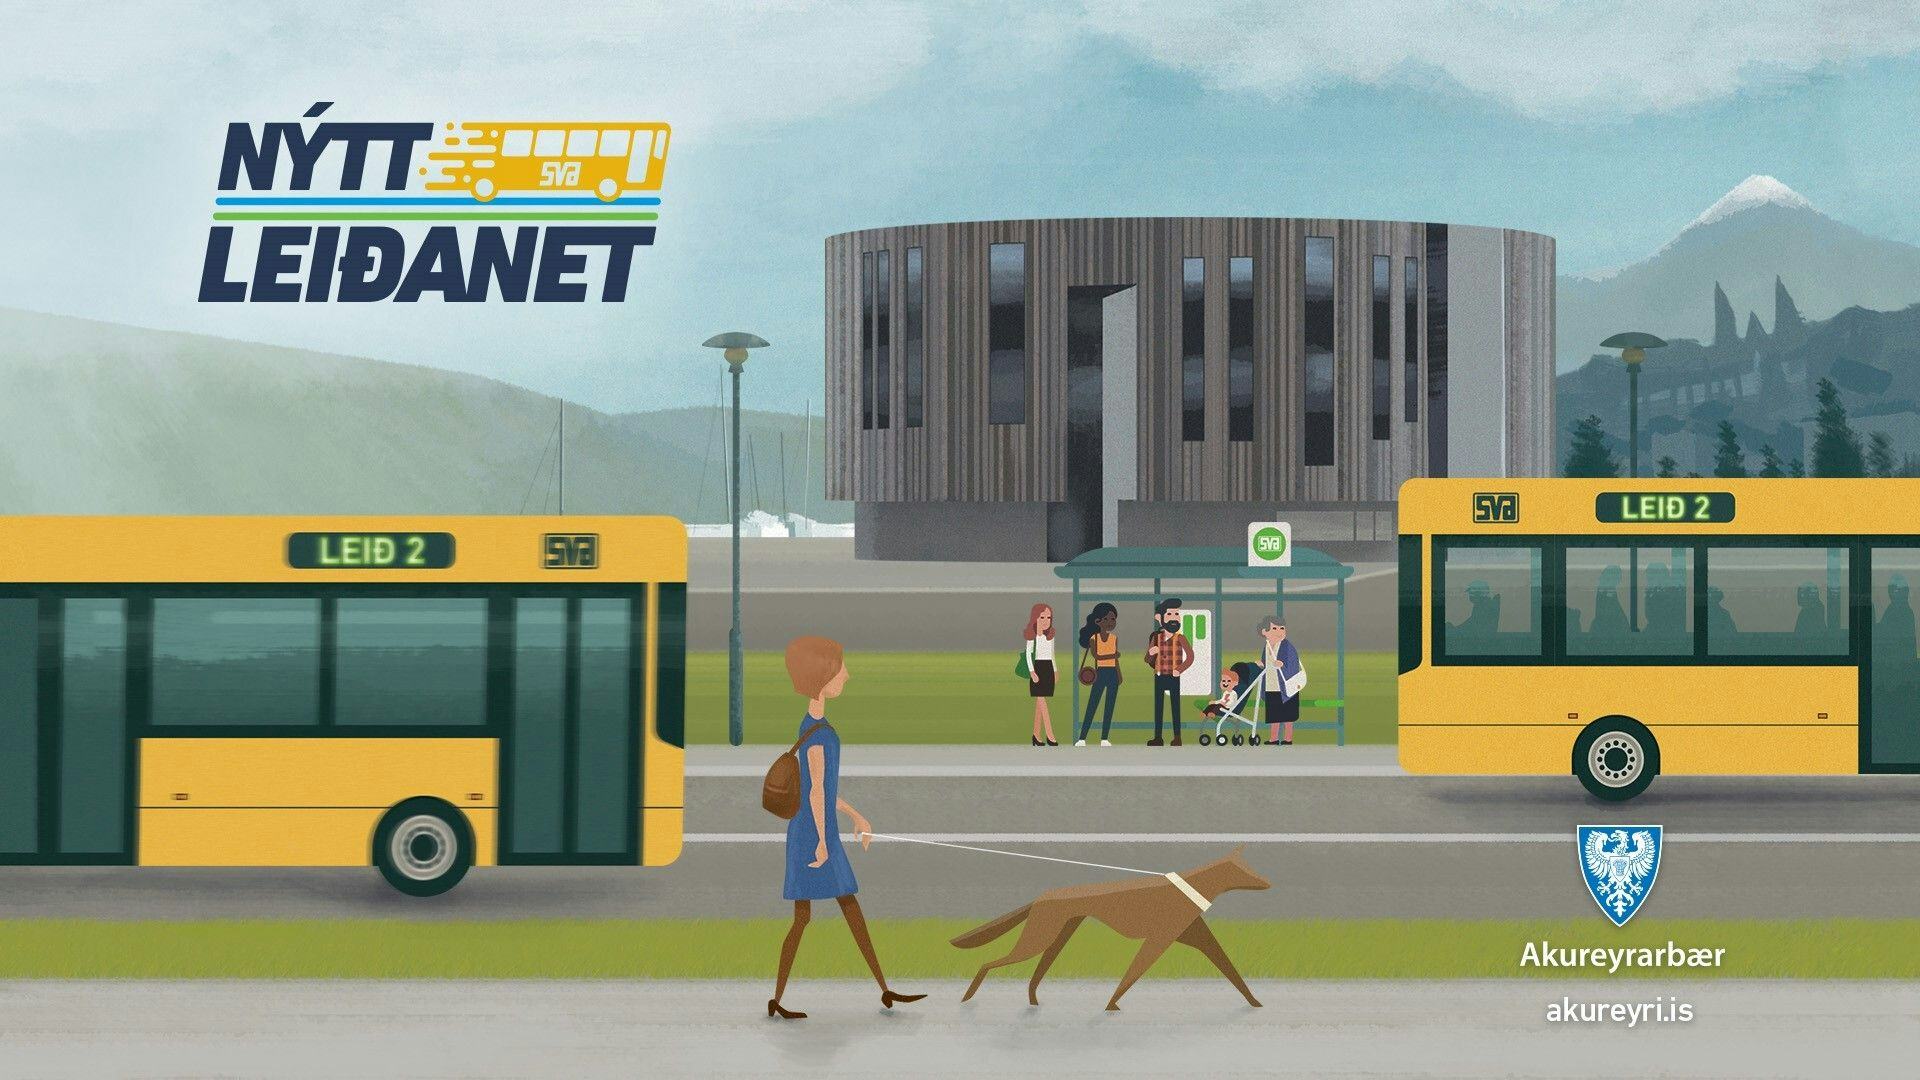 A graphic showing a city bus scene with people waiting at a bus stop, a woman walking by with a dog 